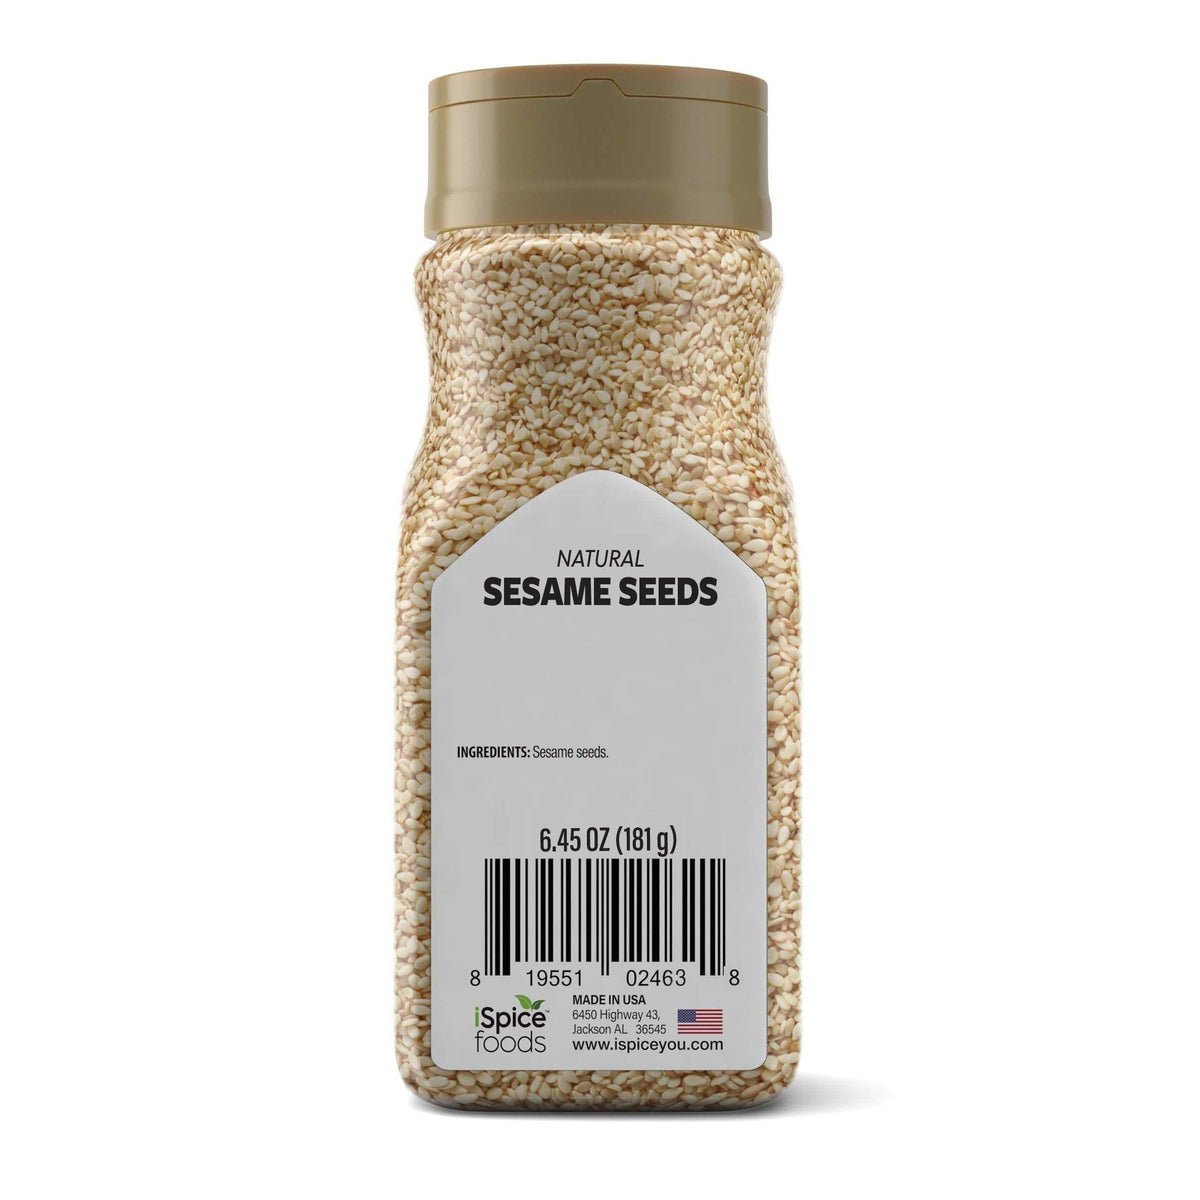 Exploring the Nutritional Value of Natural Sesame Seeds